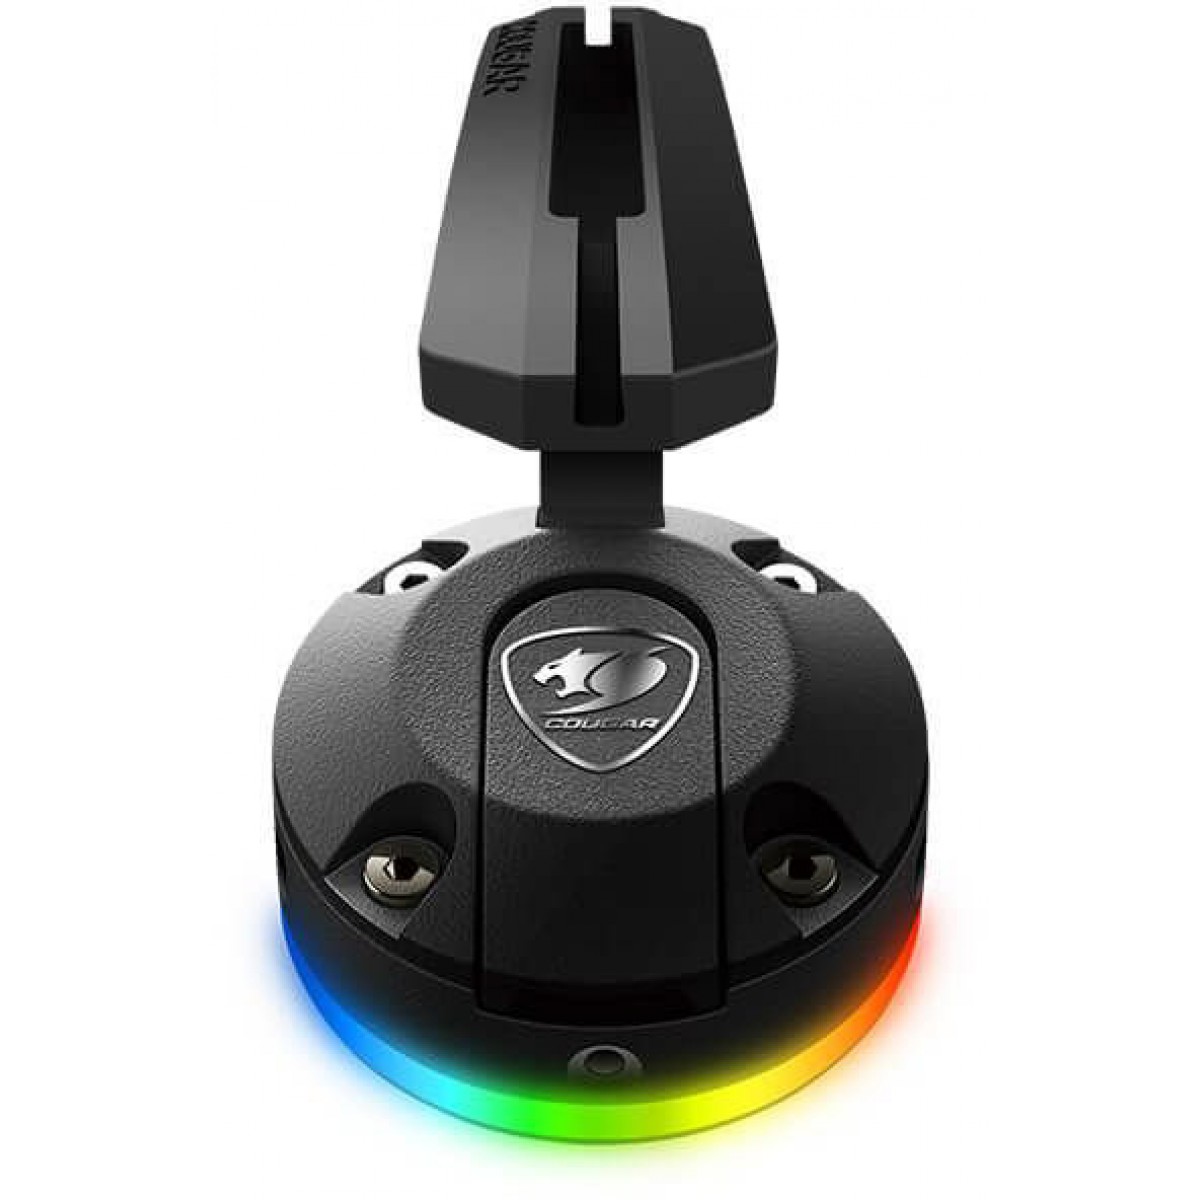 Suporte Mouse Bungee Cougar Bunker, RGB, Black